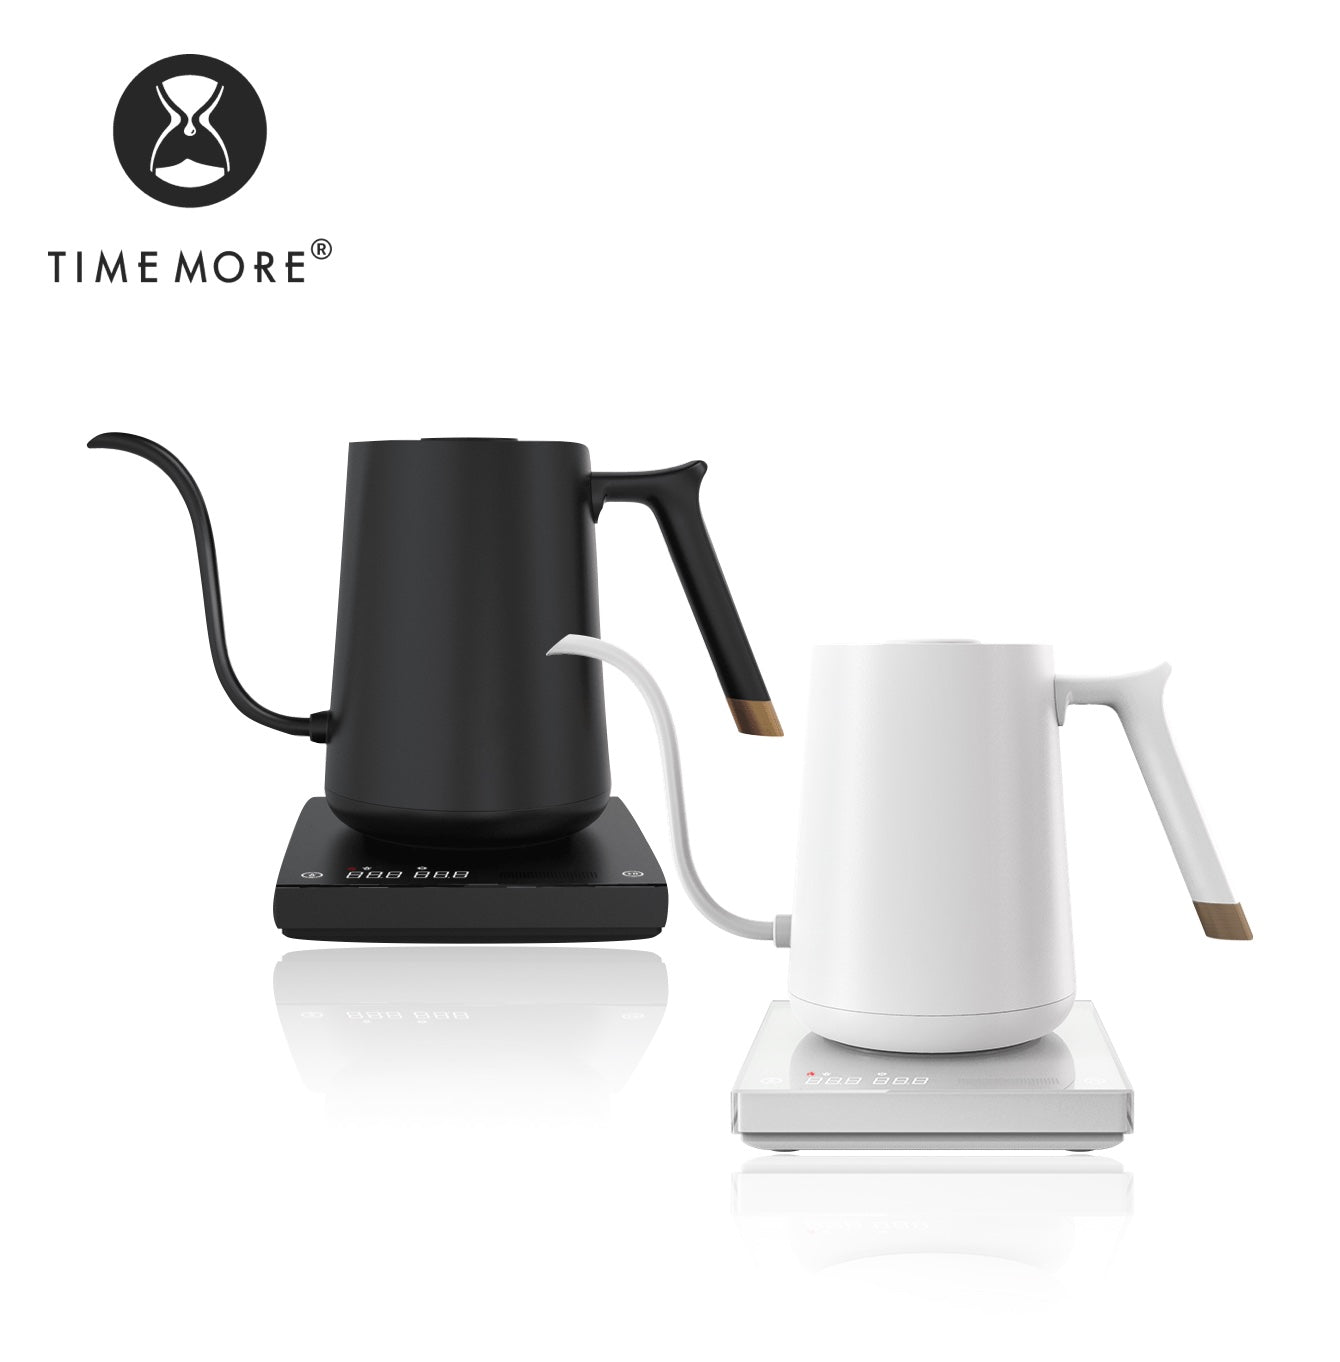  TIMEMORE Electric Gooseneck Kettle with Temperature Control  FISH SMART BPA Free Stainless Steel Tea Kettle Automatic Shut Off for  Coffee, Tea, Basics 600ml, Matt Black: Home & Kitchen